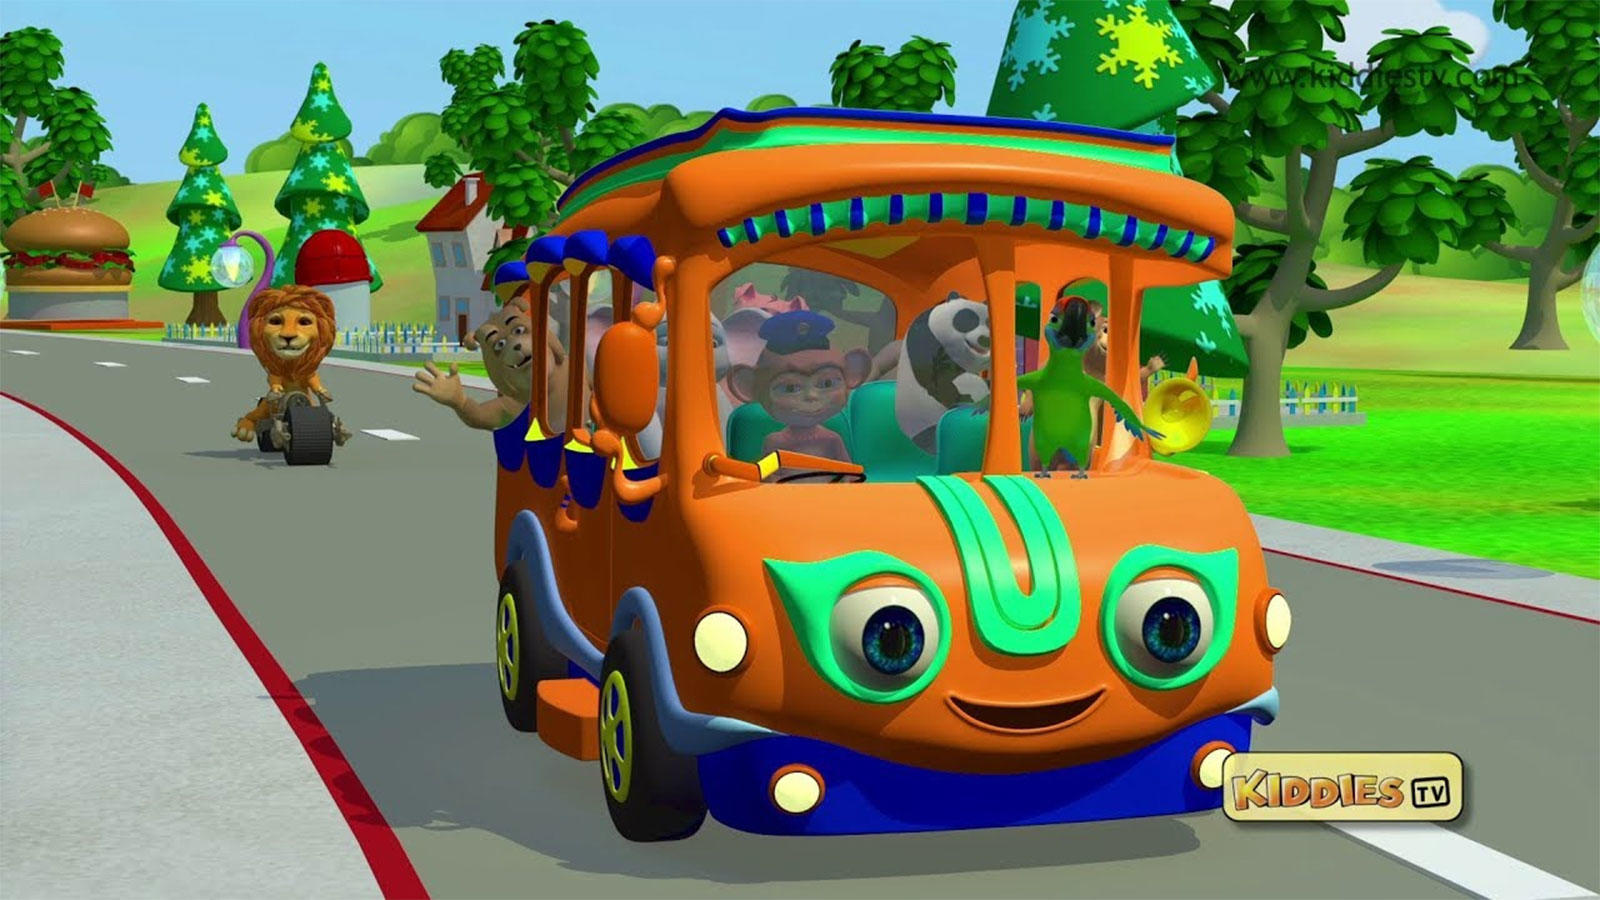 Watch Best Children English Nursery Rhyme 'Wheels On The Bus   London City'  for Kids   Check out Fun Kids Nursery Rhymes And Baby Songs In English.